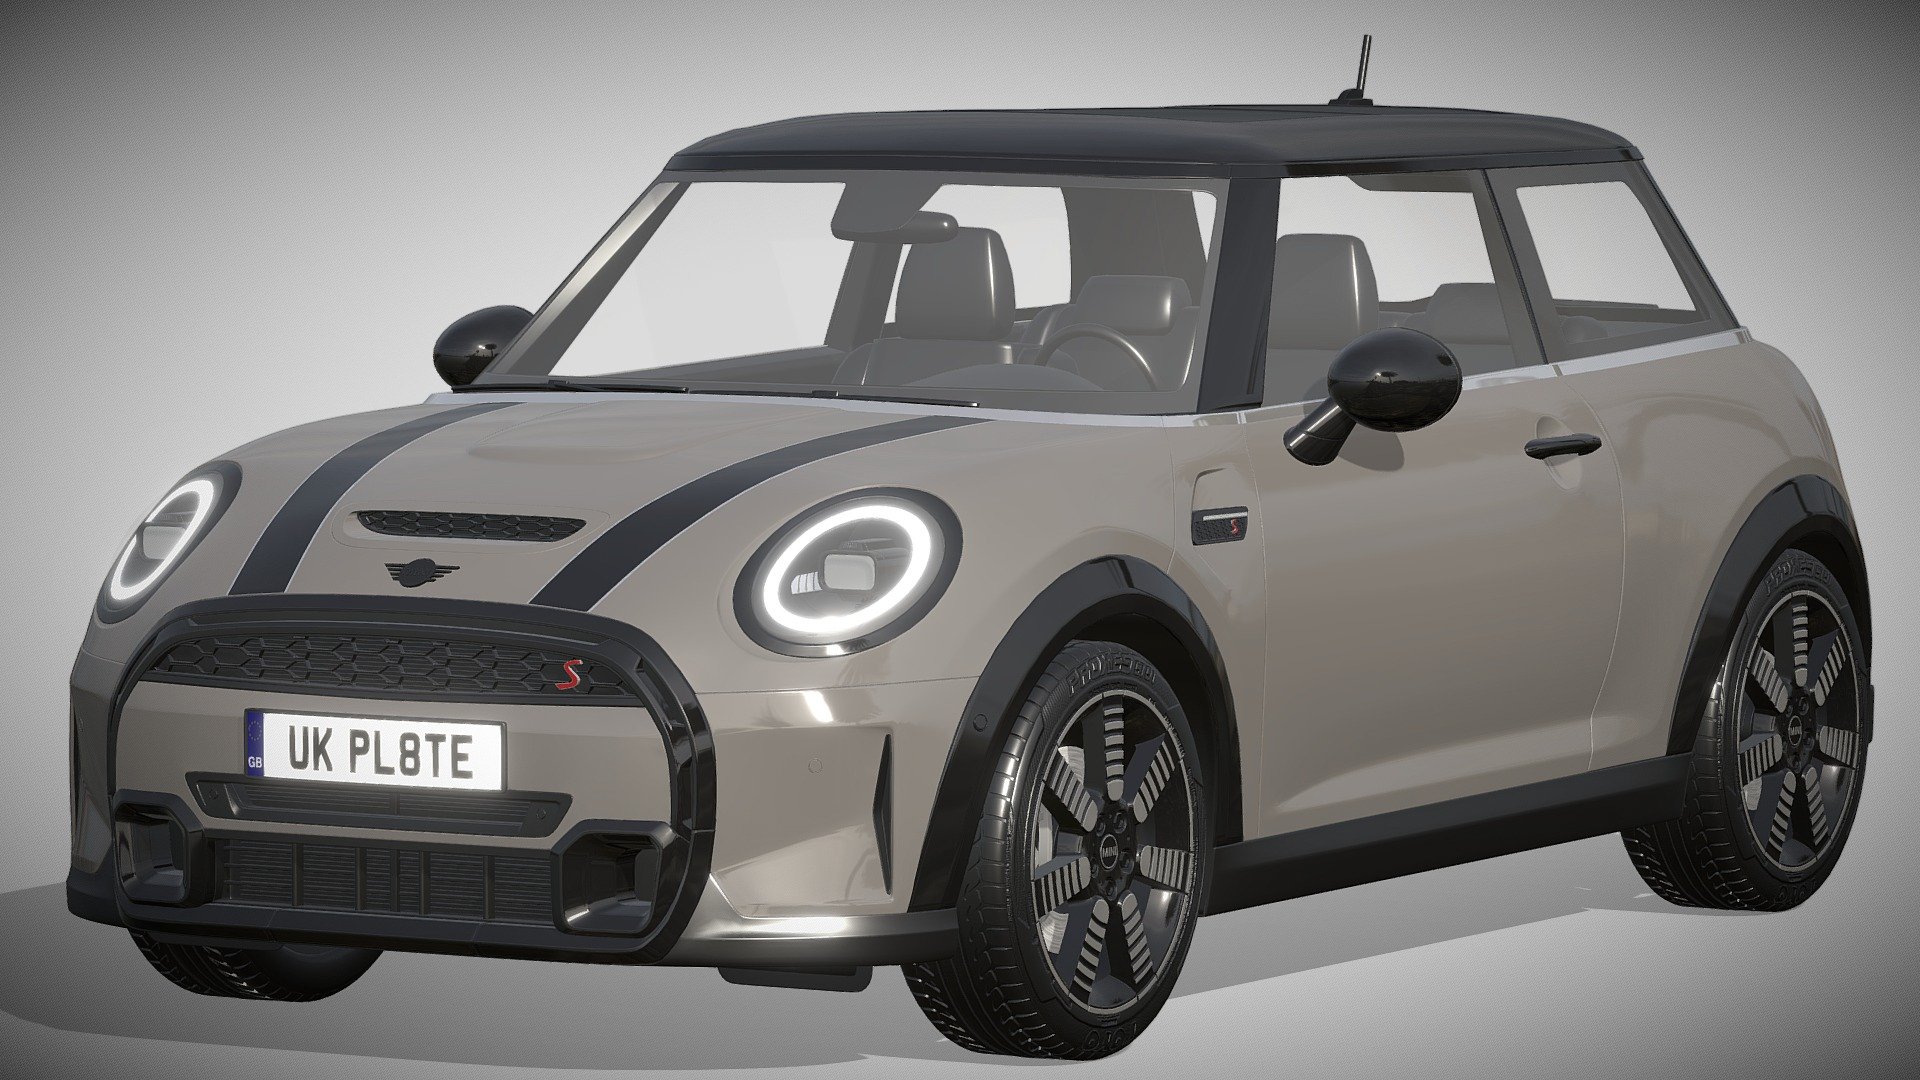 Mini Cooper S 3-door 2022

https://www.miniusa.com/model/hardtop.html

Clean geometry Light weight model, yet completely detailed for HI-Res renders. Use for movies, Advertisements or games

Corona render and materials

All textures include in *.rar files

Lighting setup is not included in the file! - Mini Cooper S 3-door 2022 - Buy Royalty Free 3D model by zifir3d 3d model